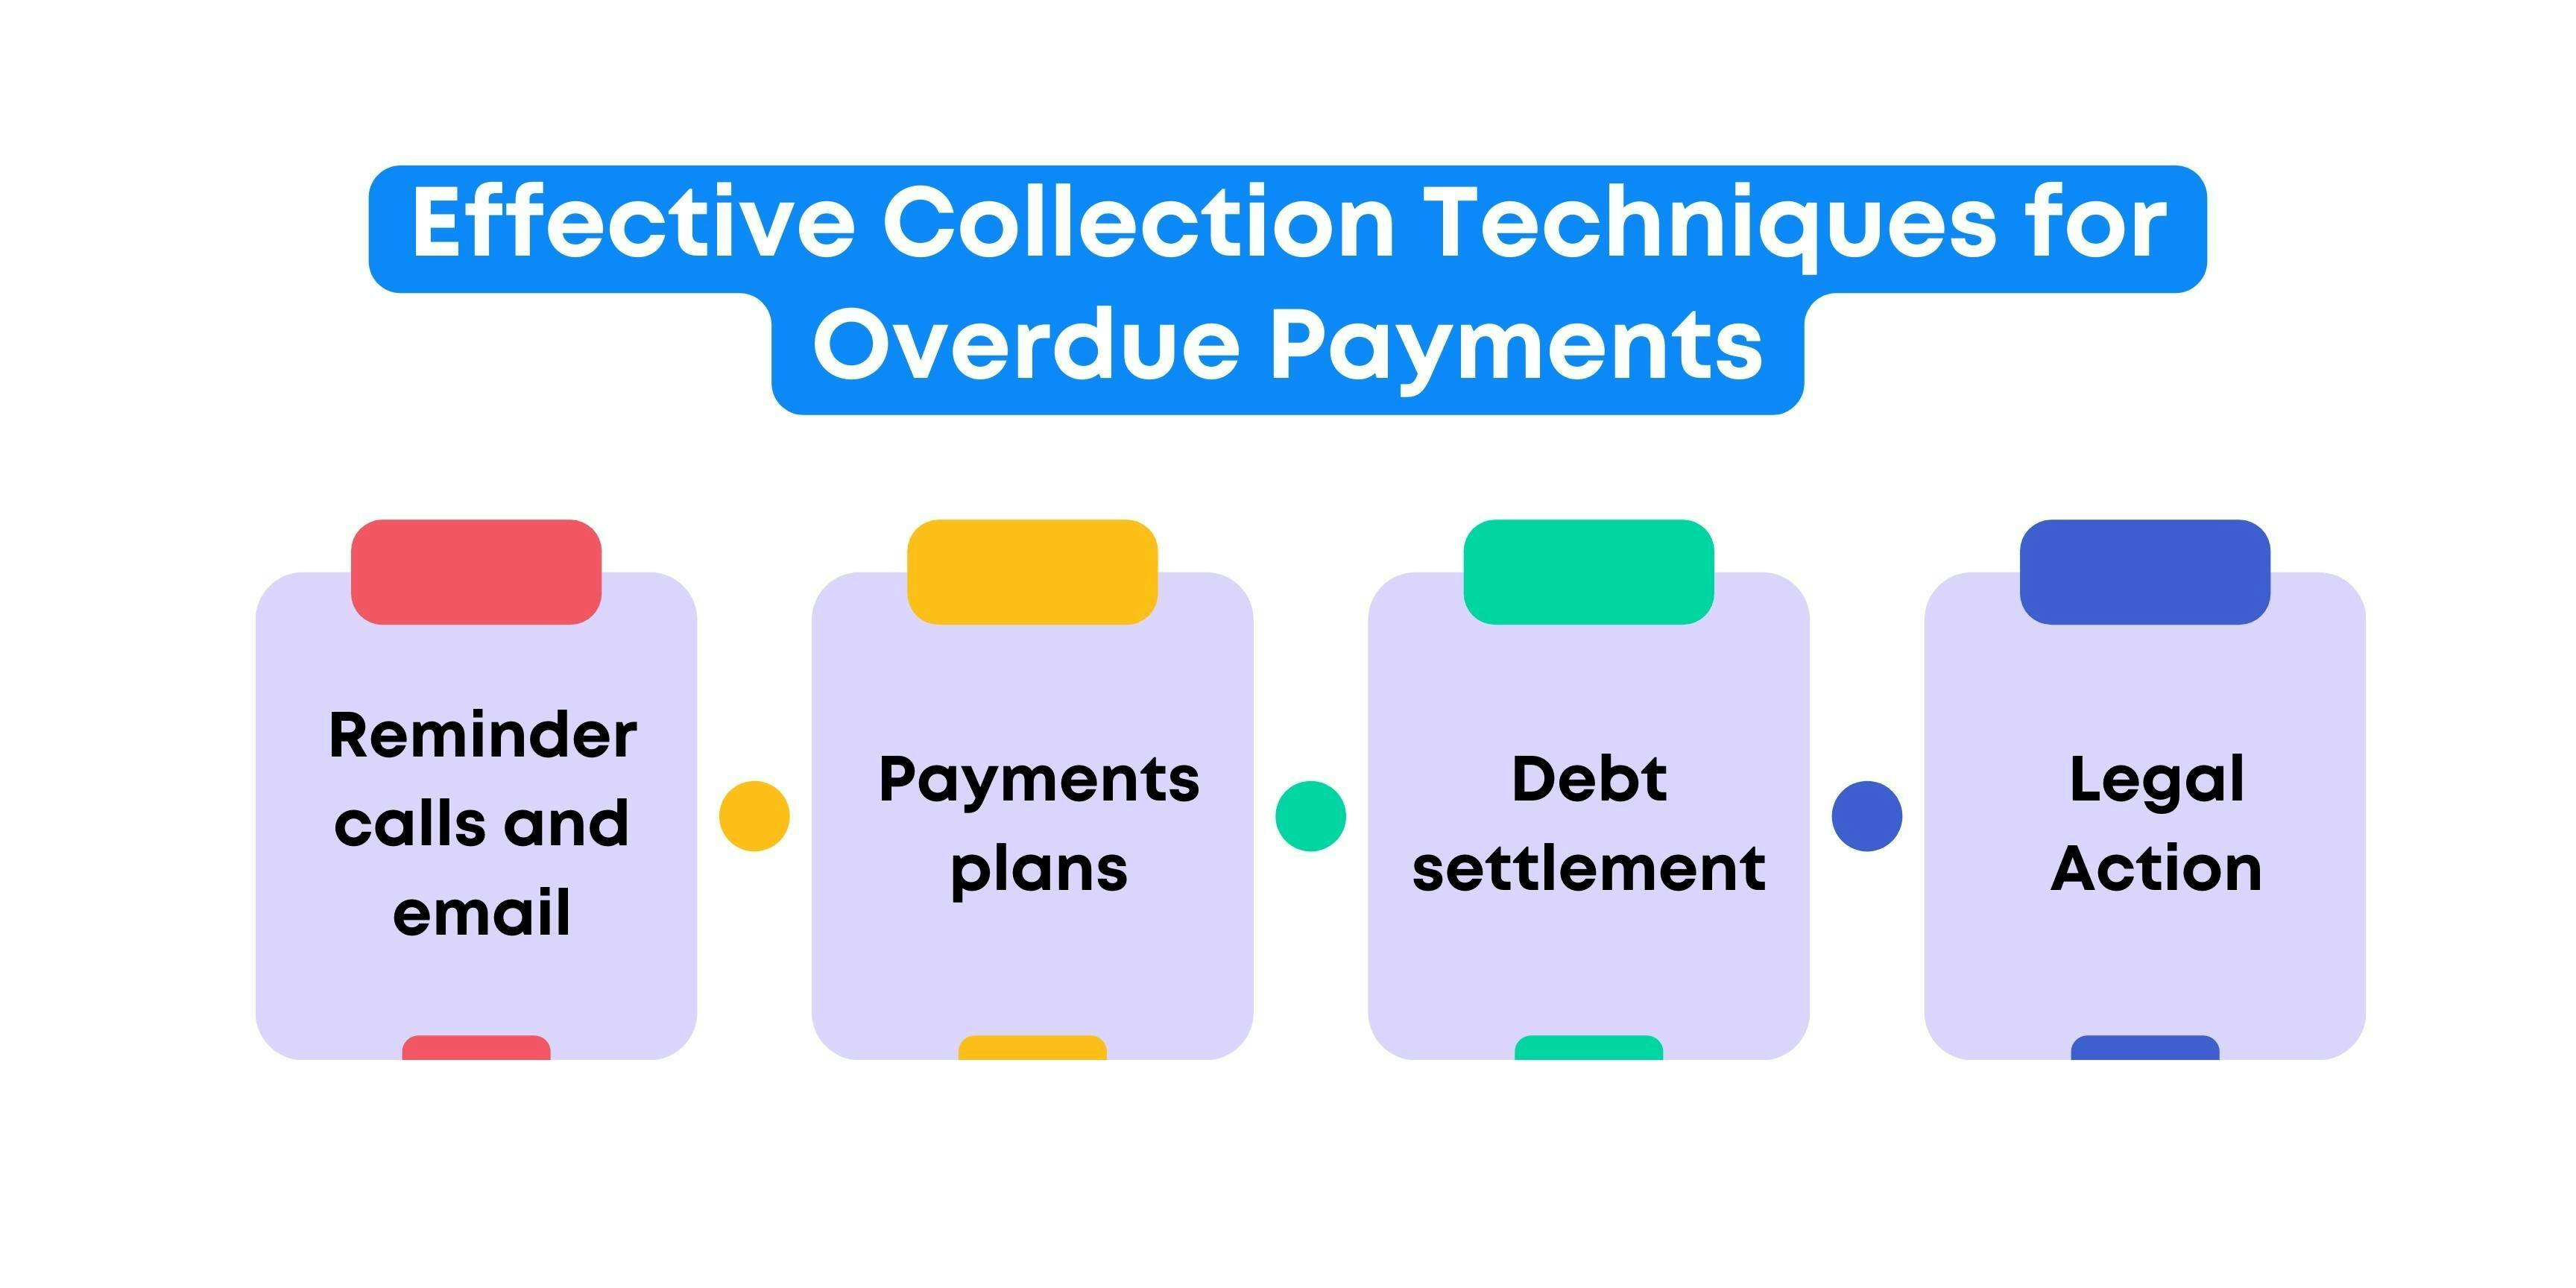 Effective Collection Techniques for Overdue Payments